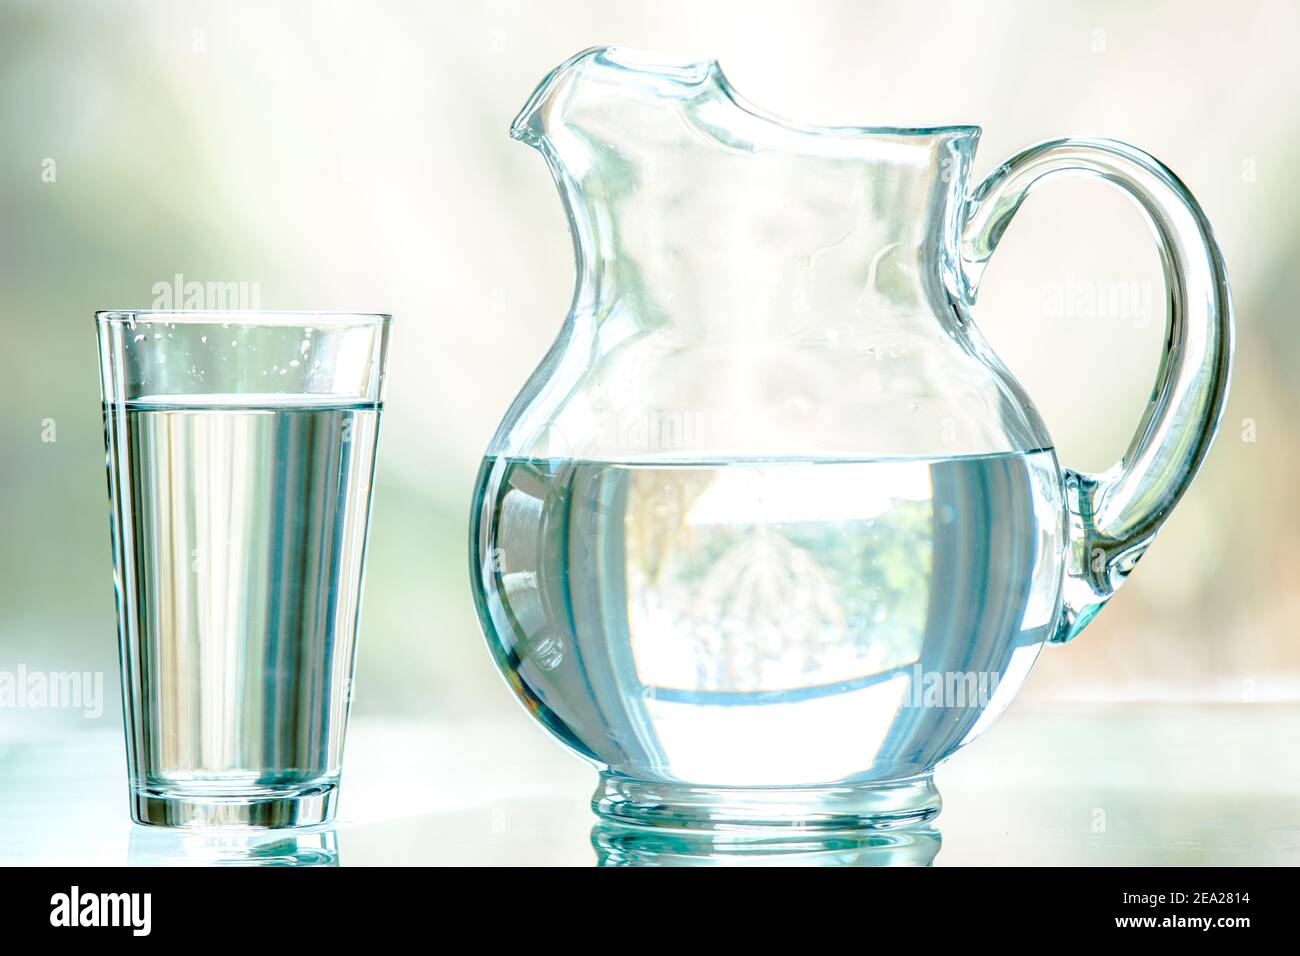 A clear pitcher and glass filled with water. It is shot straight on on a glass table, with a nature background seen through a window .Shallow DOF. Stock Photo